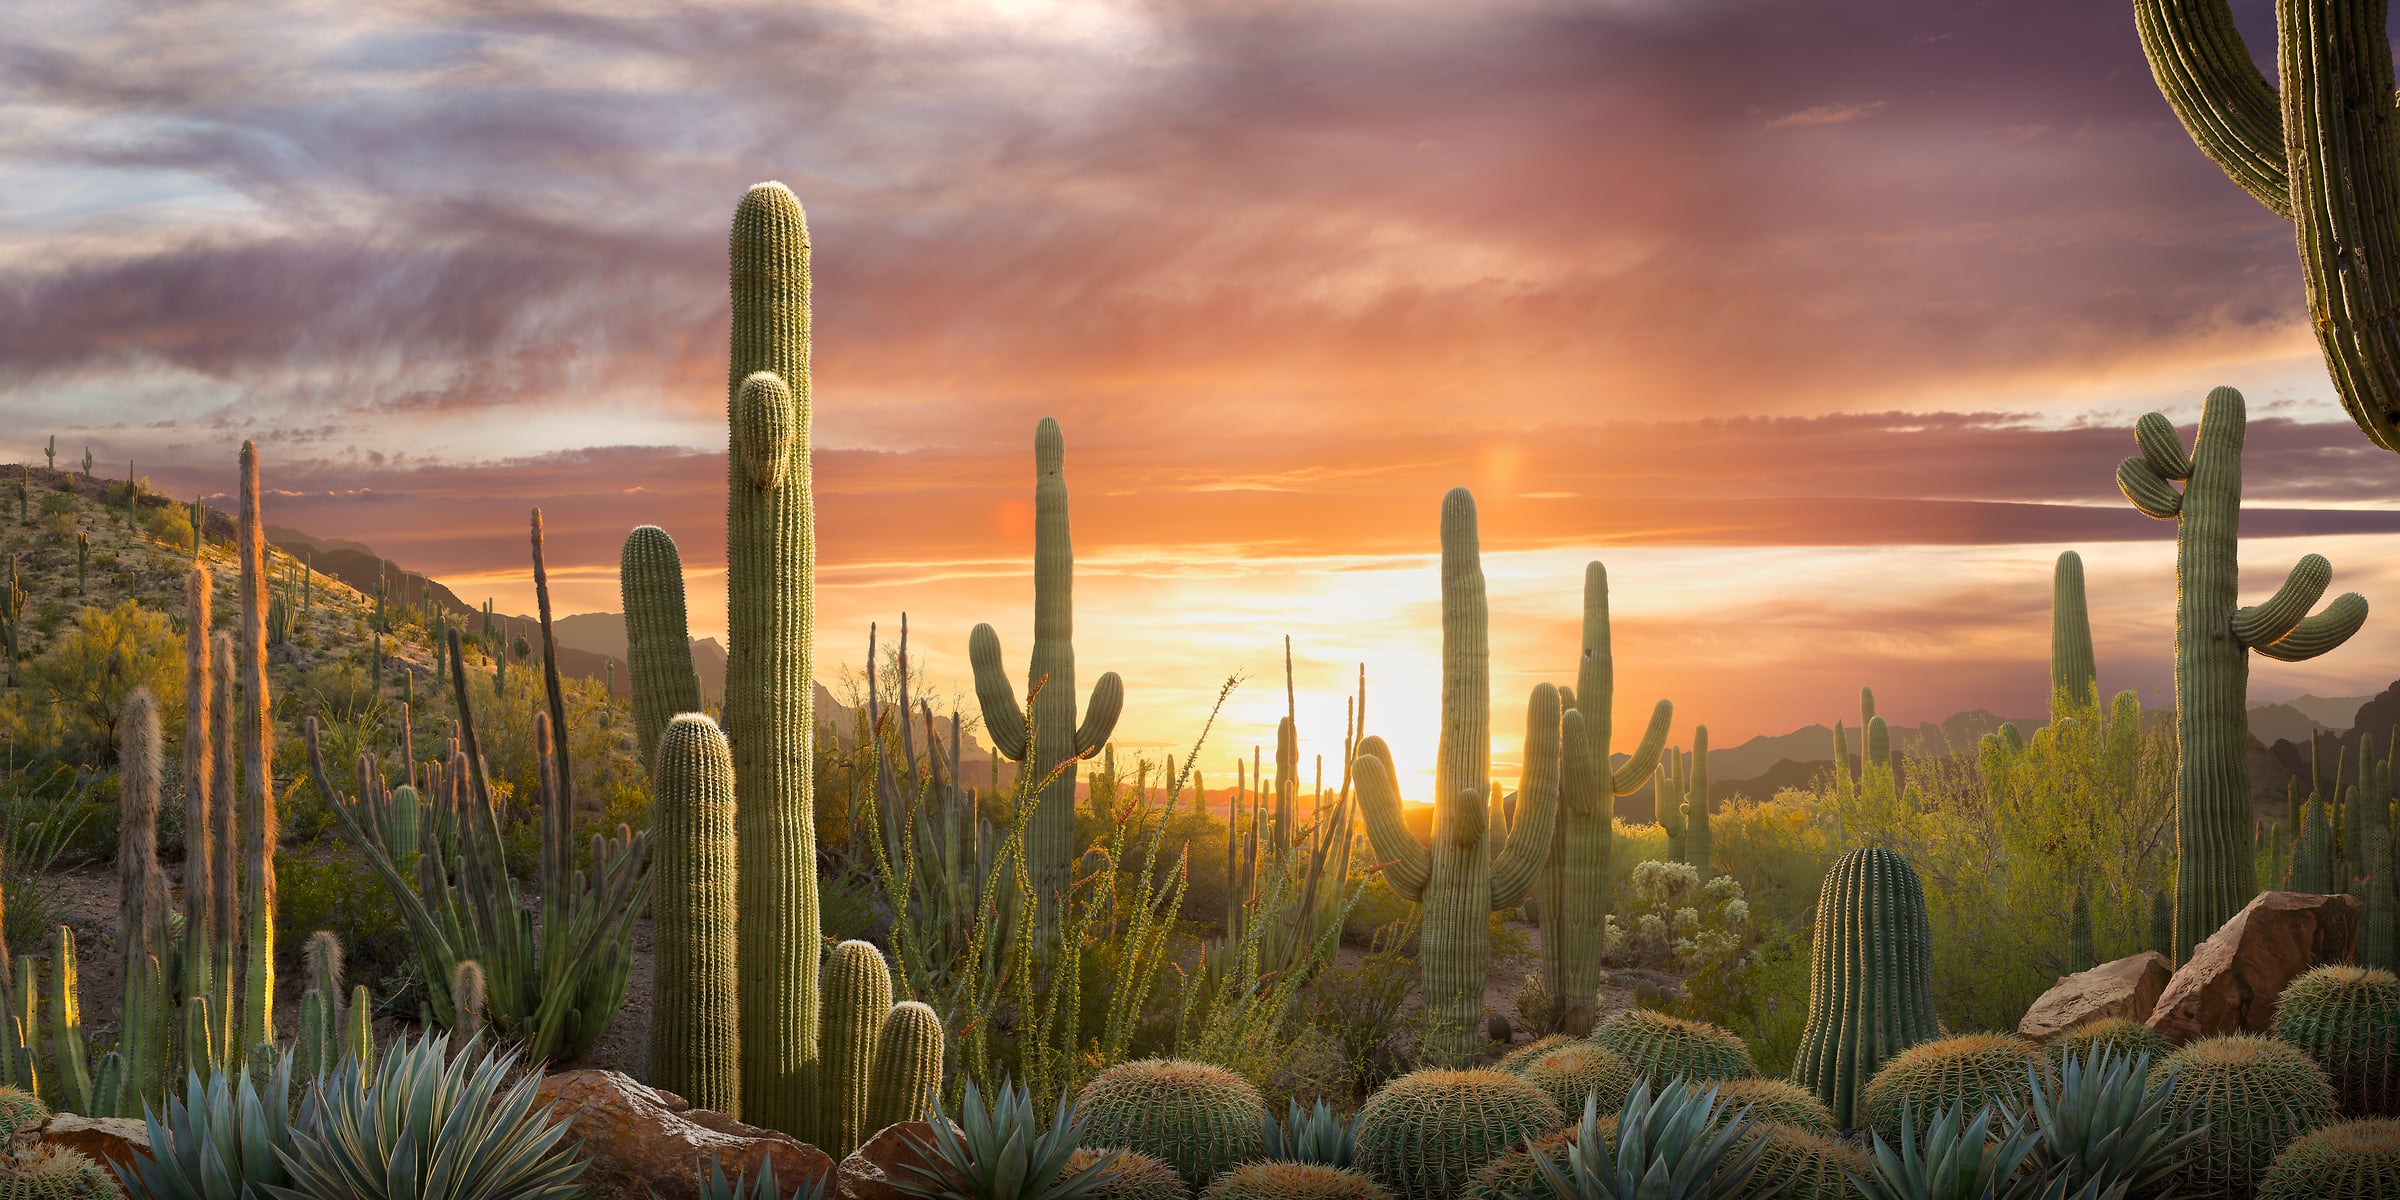 252 megapixels! A very high resolution, large-format VAST photo print of a sunset in the desert with cacti; landscape photograph created by Nick Pedersen in Superstition Mountains, Arizona